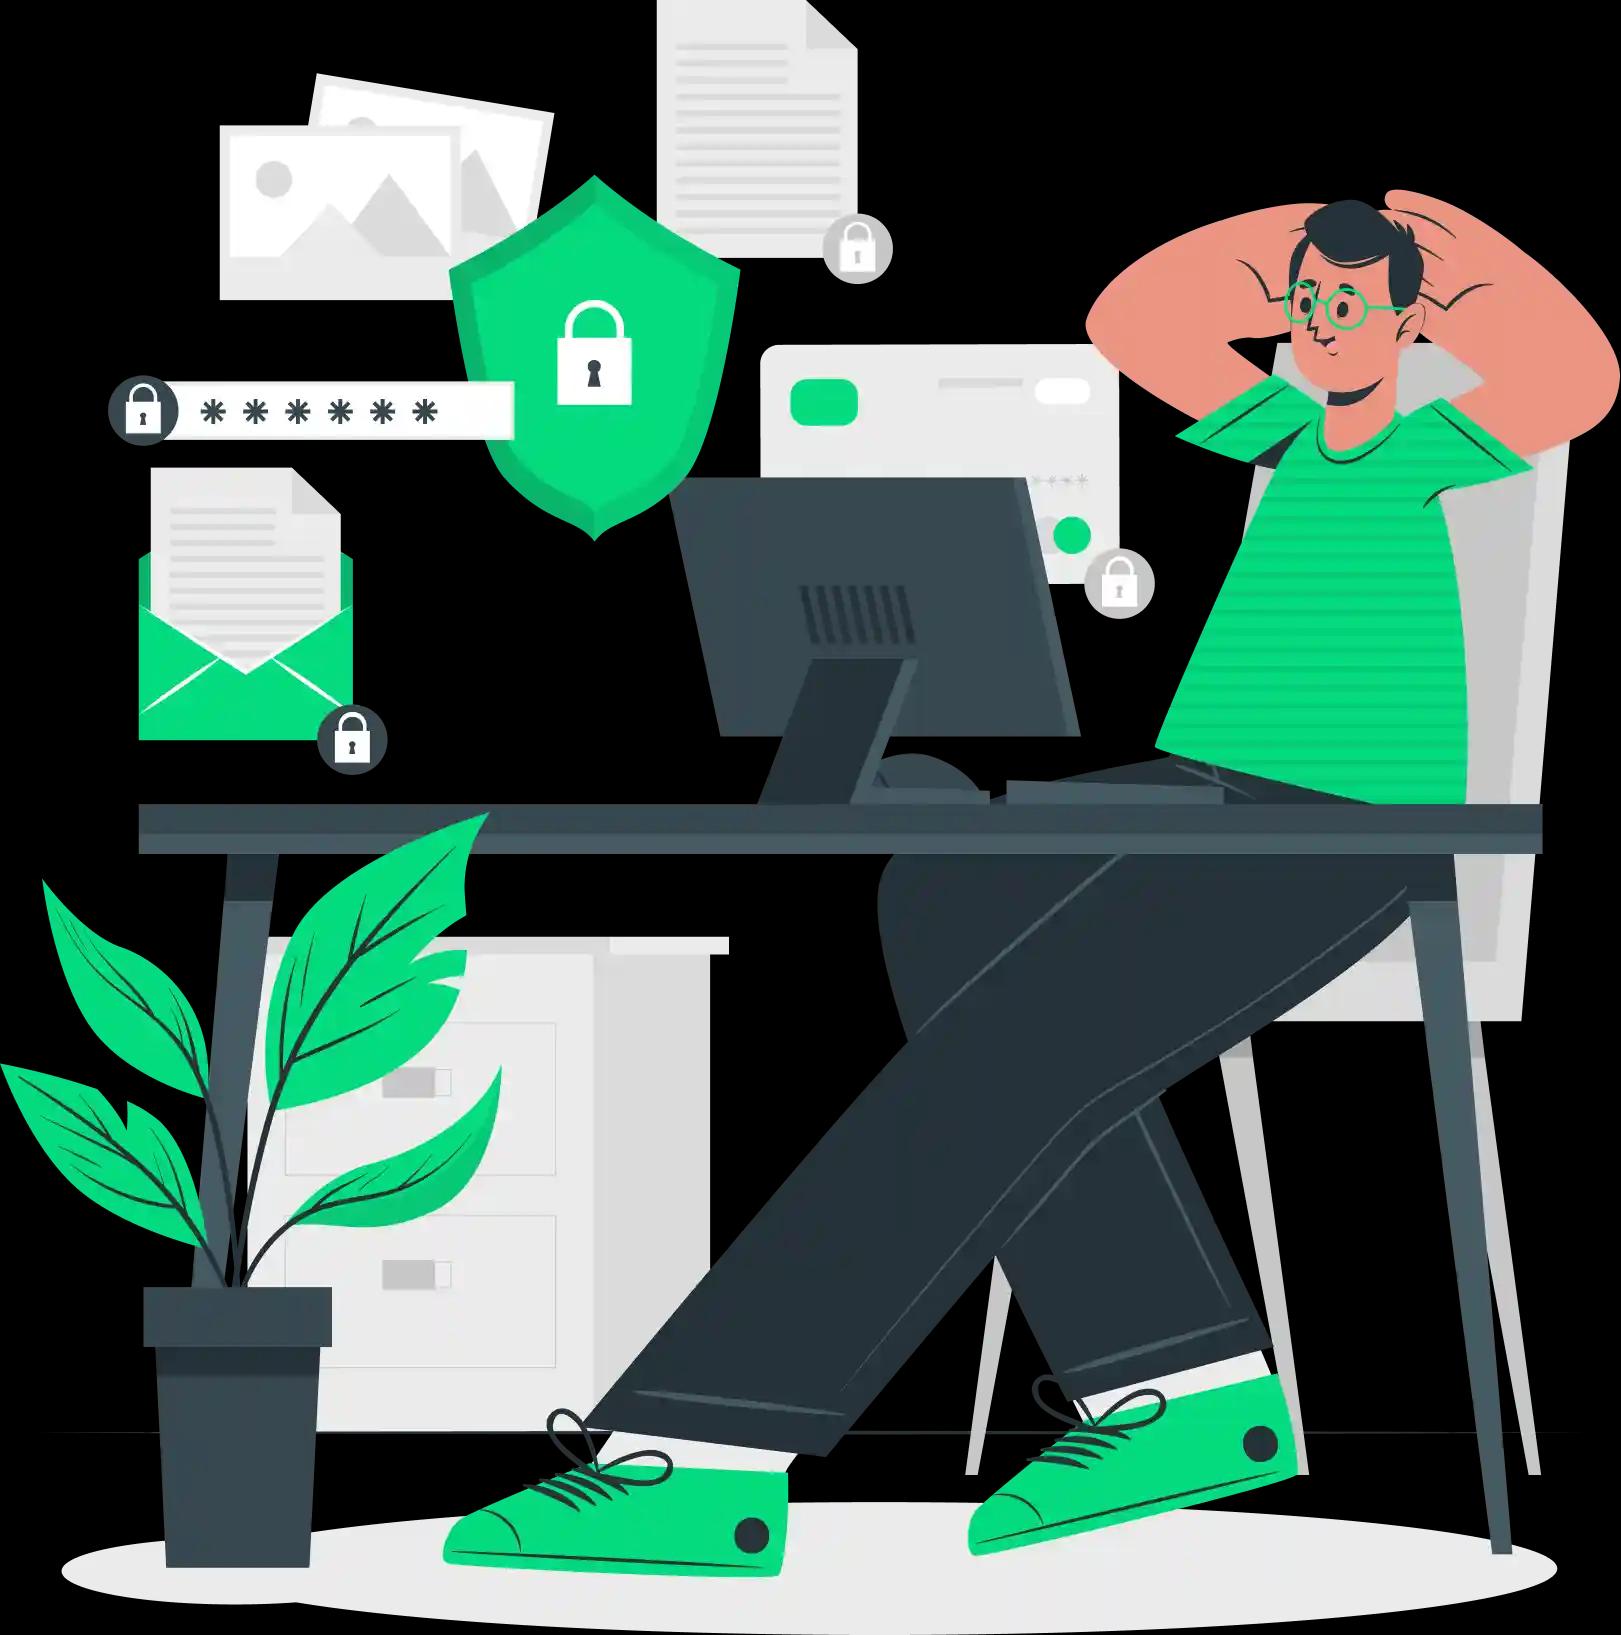 A stressed person at a computer with multiple security icons, indicating the complexities and the protective nature of professional indemnity insurance against data breaches and other liabilities.